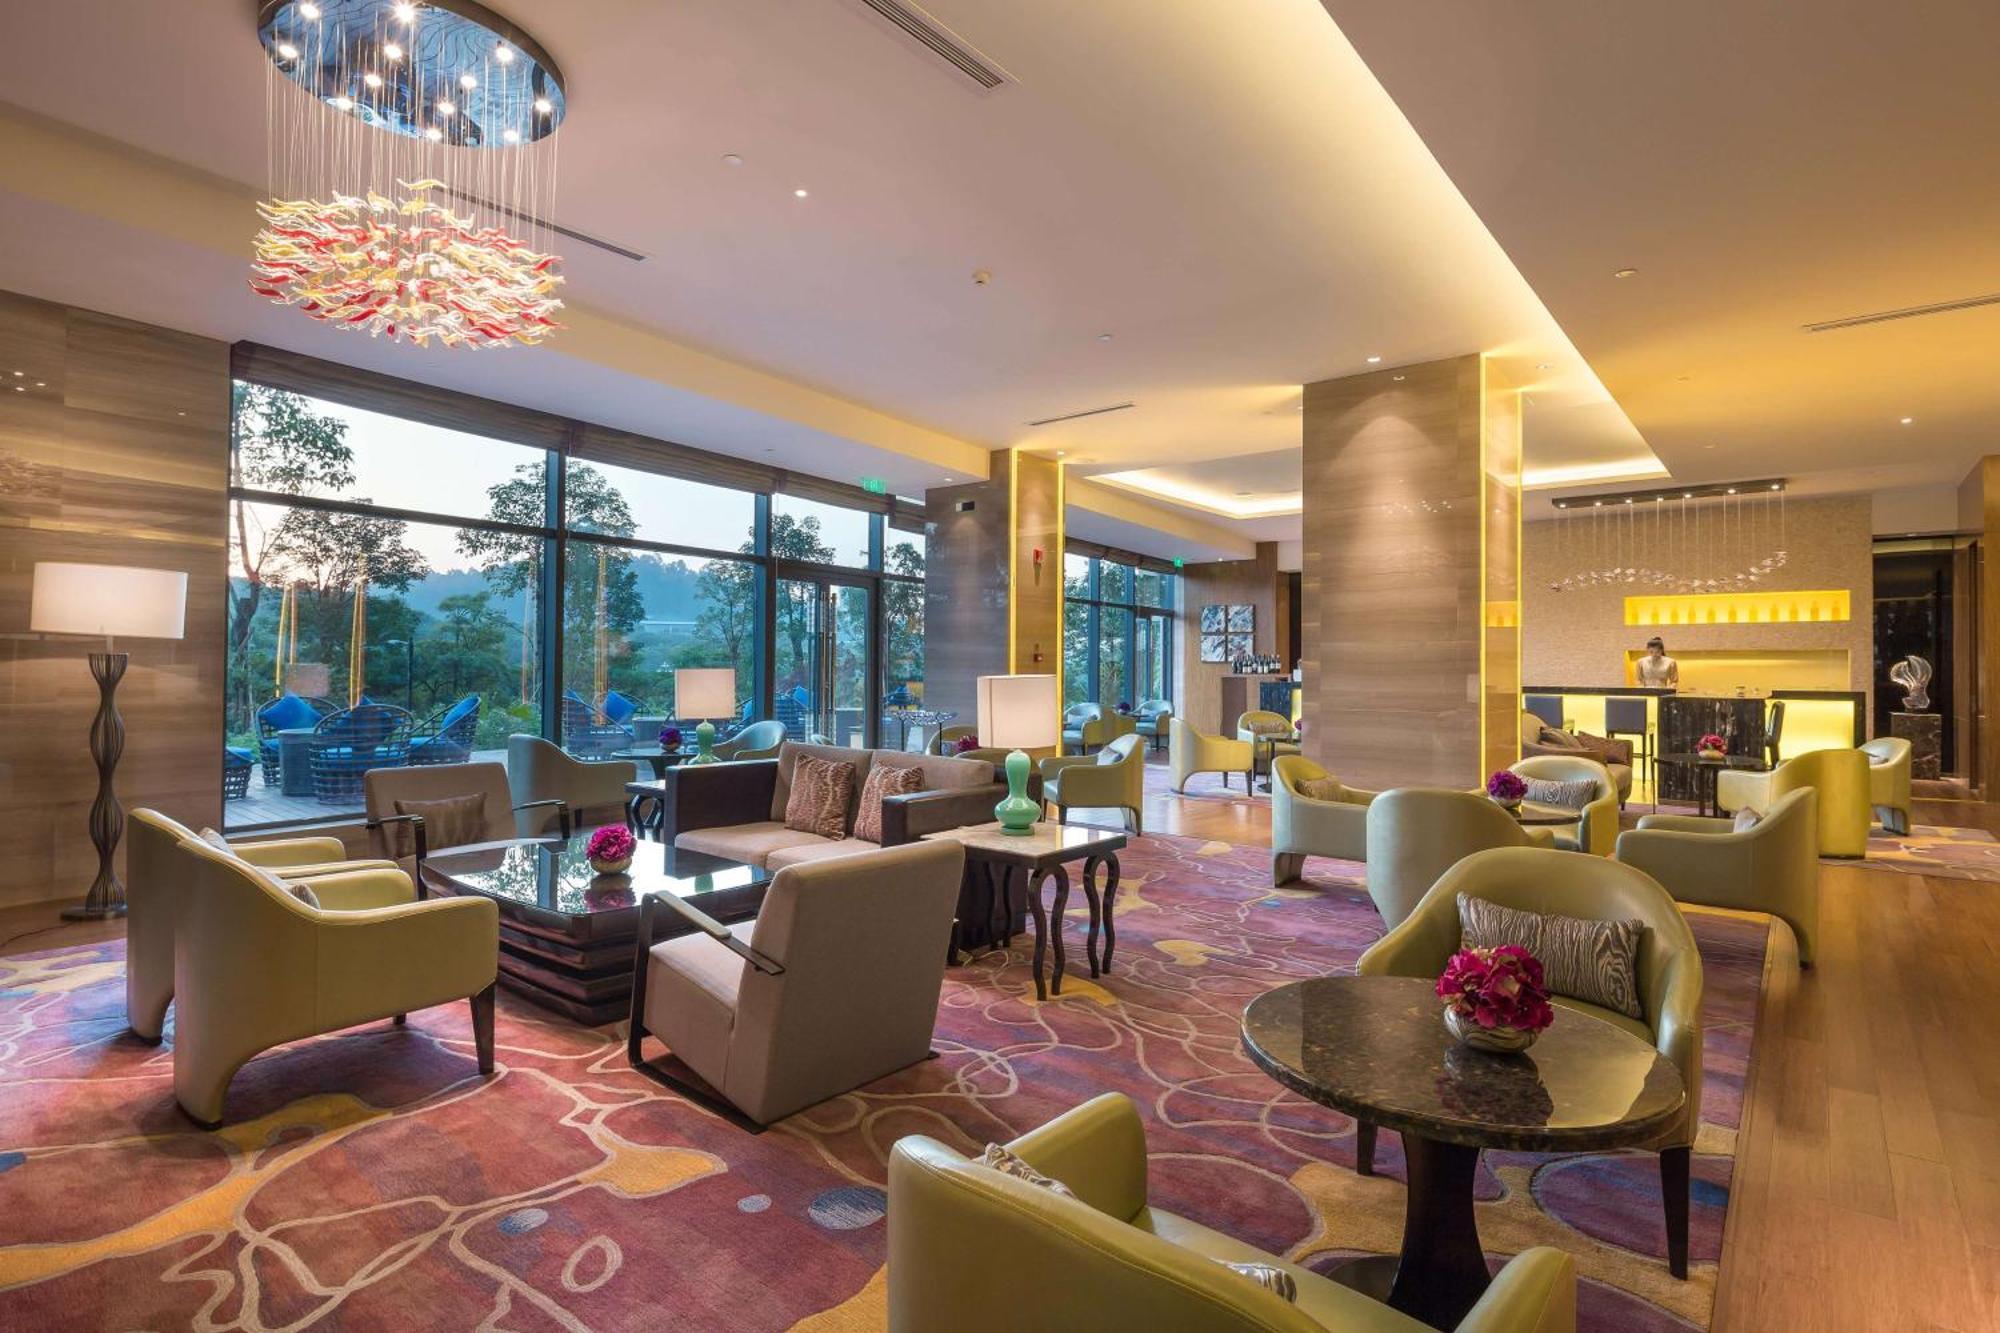 Doubletree By Hilton Hotel Guangzhou-Science City-Free Shuttle Bus To Canton Fair Complex And Dining Offer מראה חיצוני תמונה